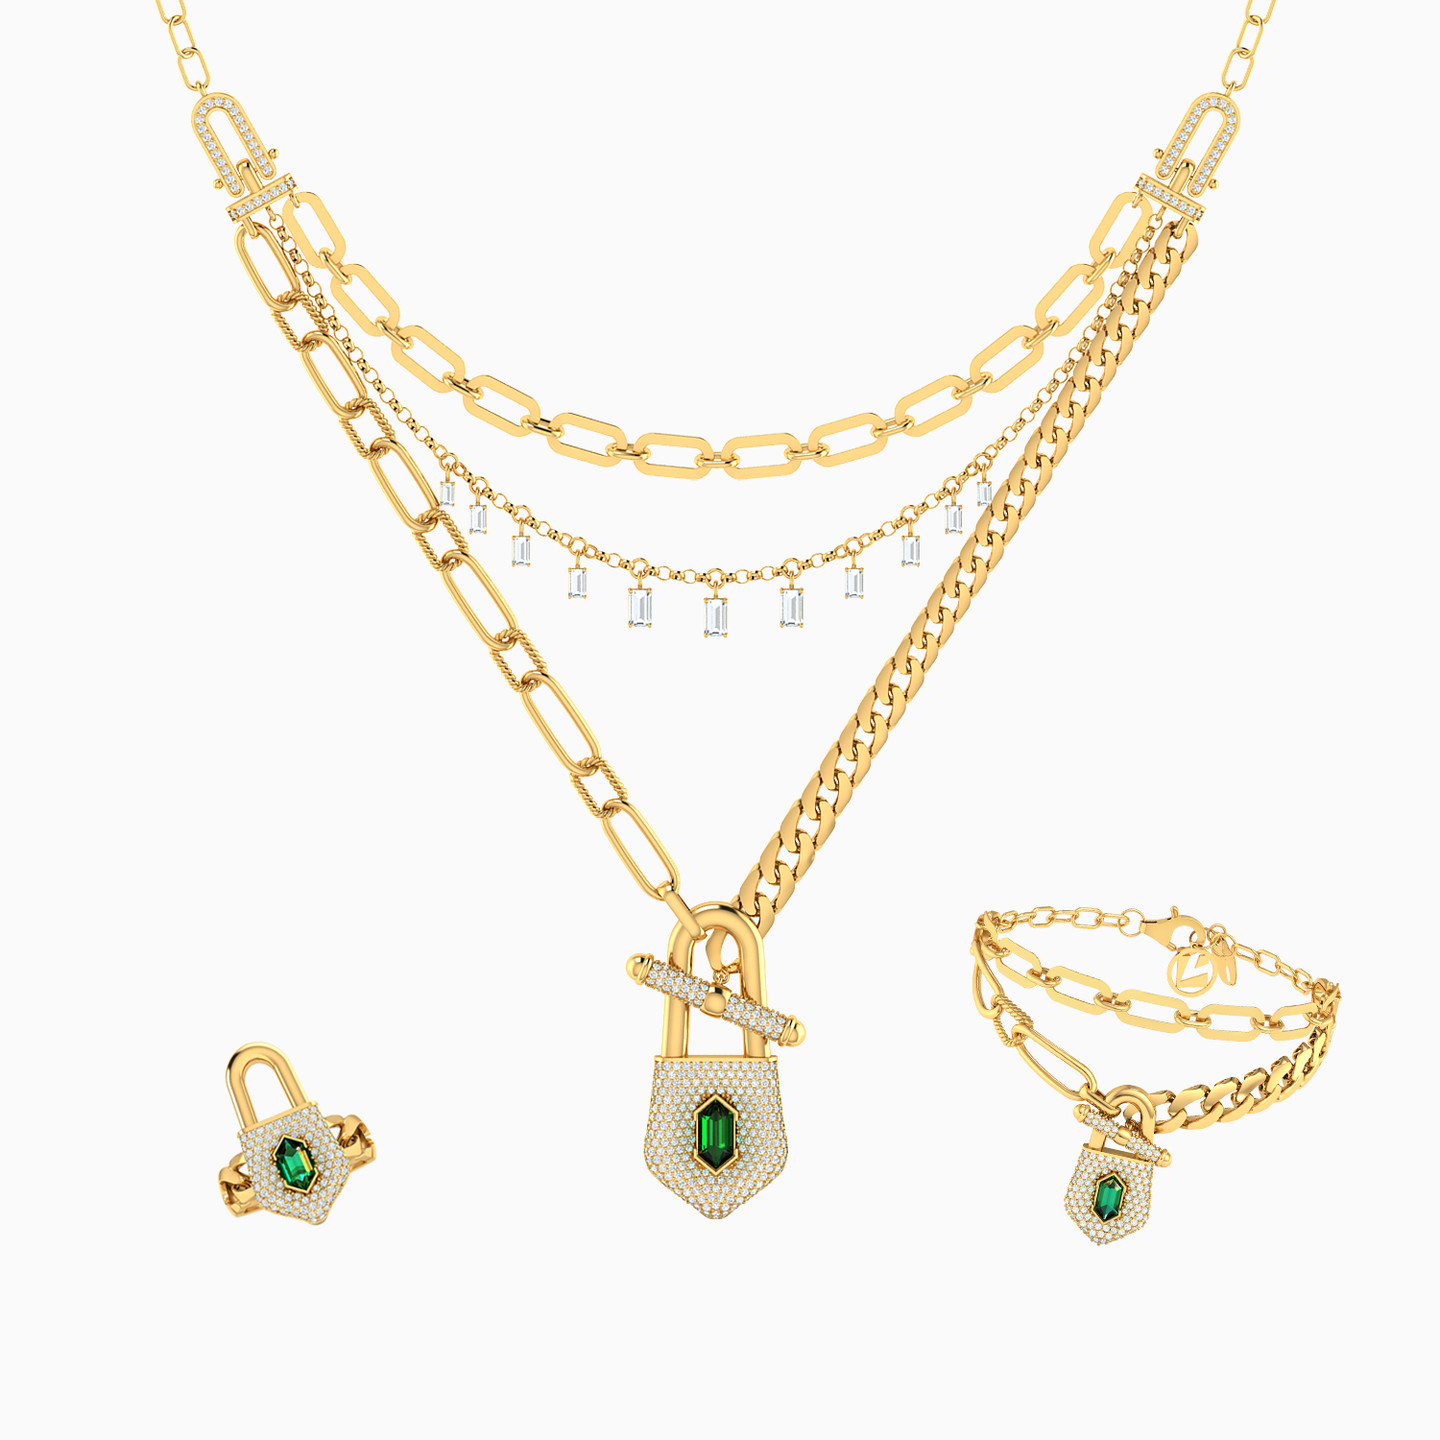 18K Gold Colored Stones Jewelry Set - 3 Pieces